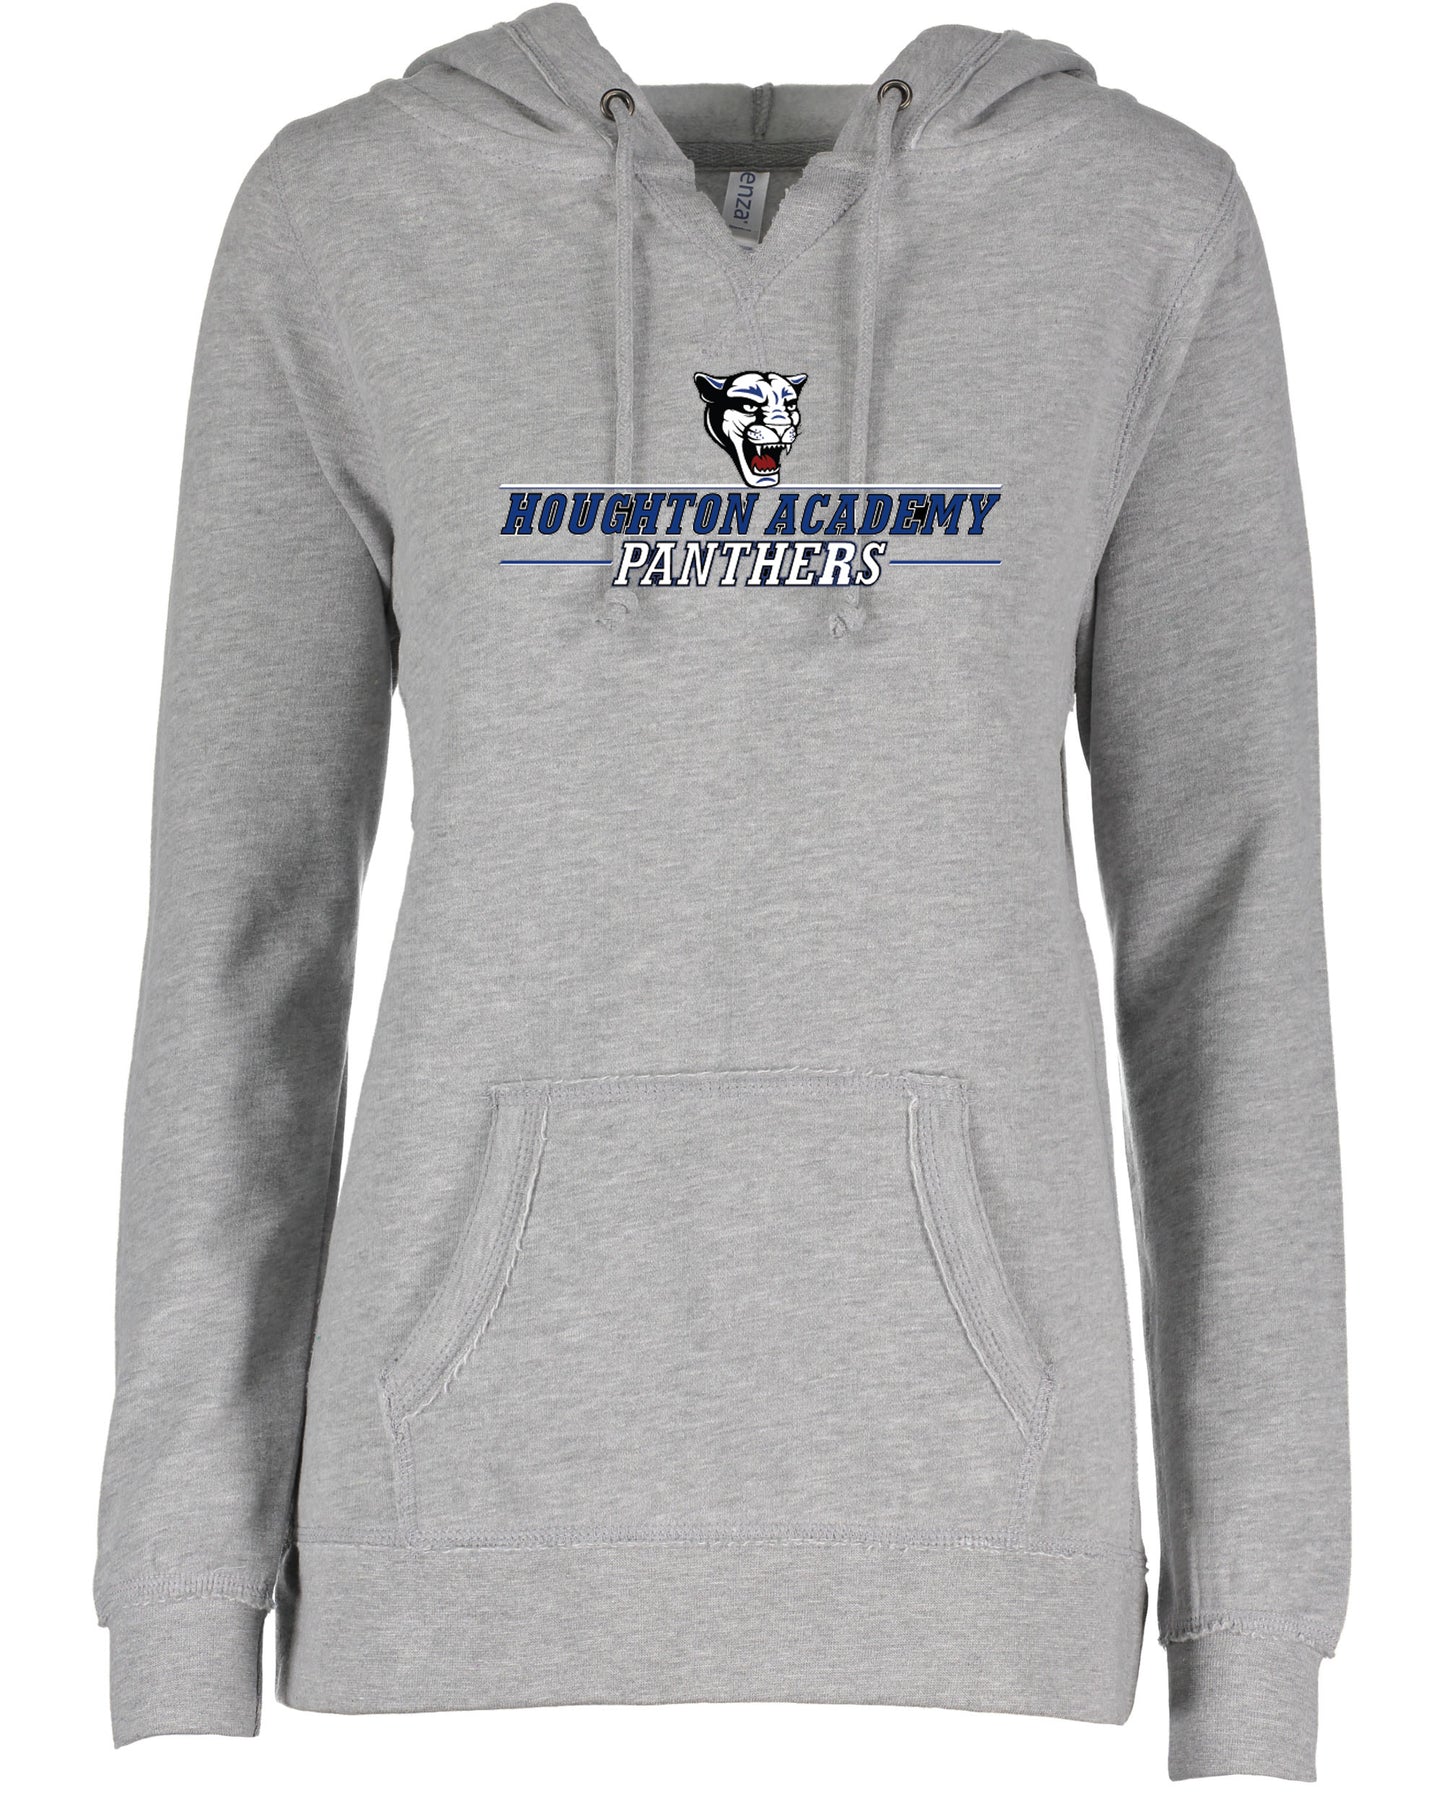 Houghton Academy (Panthers Logo) Ladies V-notch hoodie